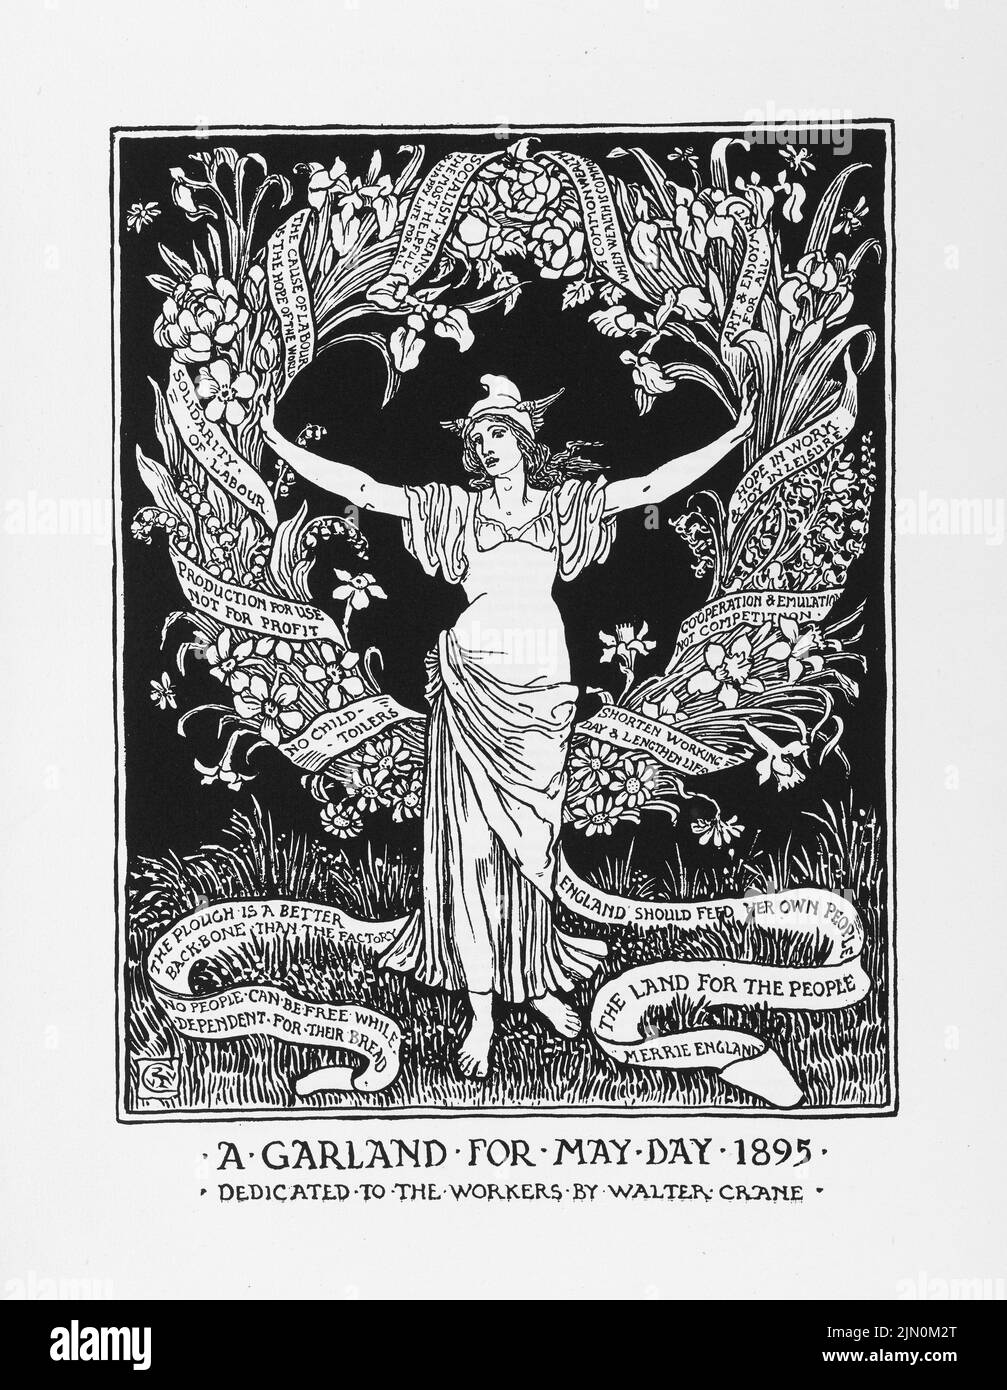 A Garland for May Day 1895. Illustration by Walter Crane from Cartoons for the Cause 1886-1896, International Socialist Workers. Stock Photo